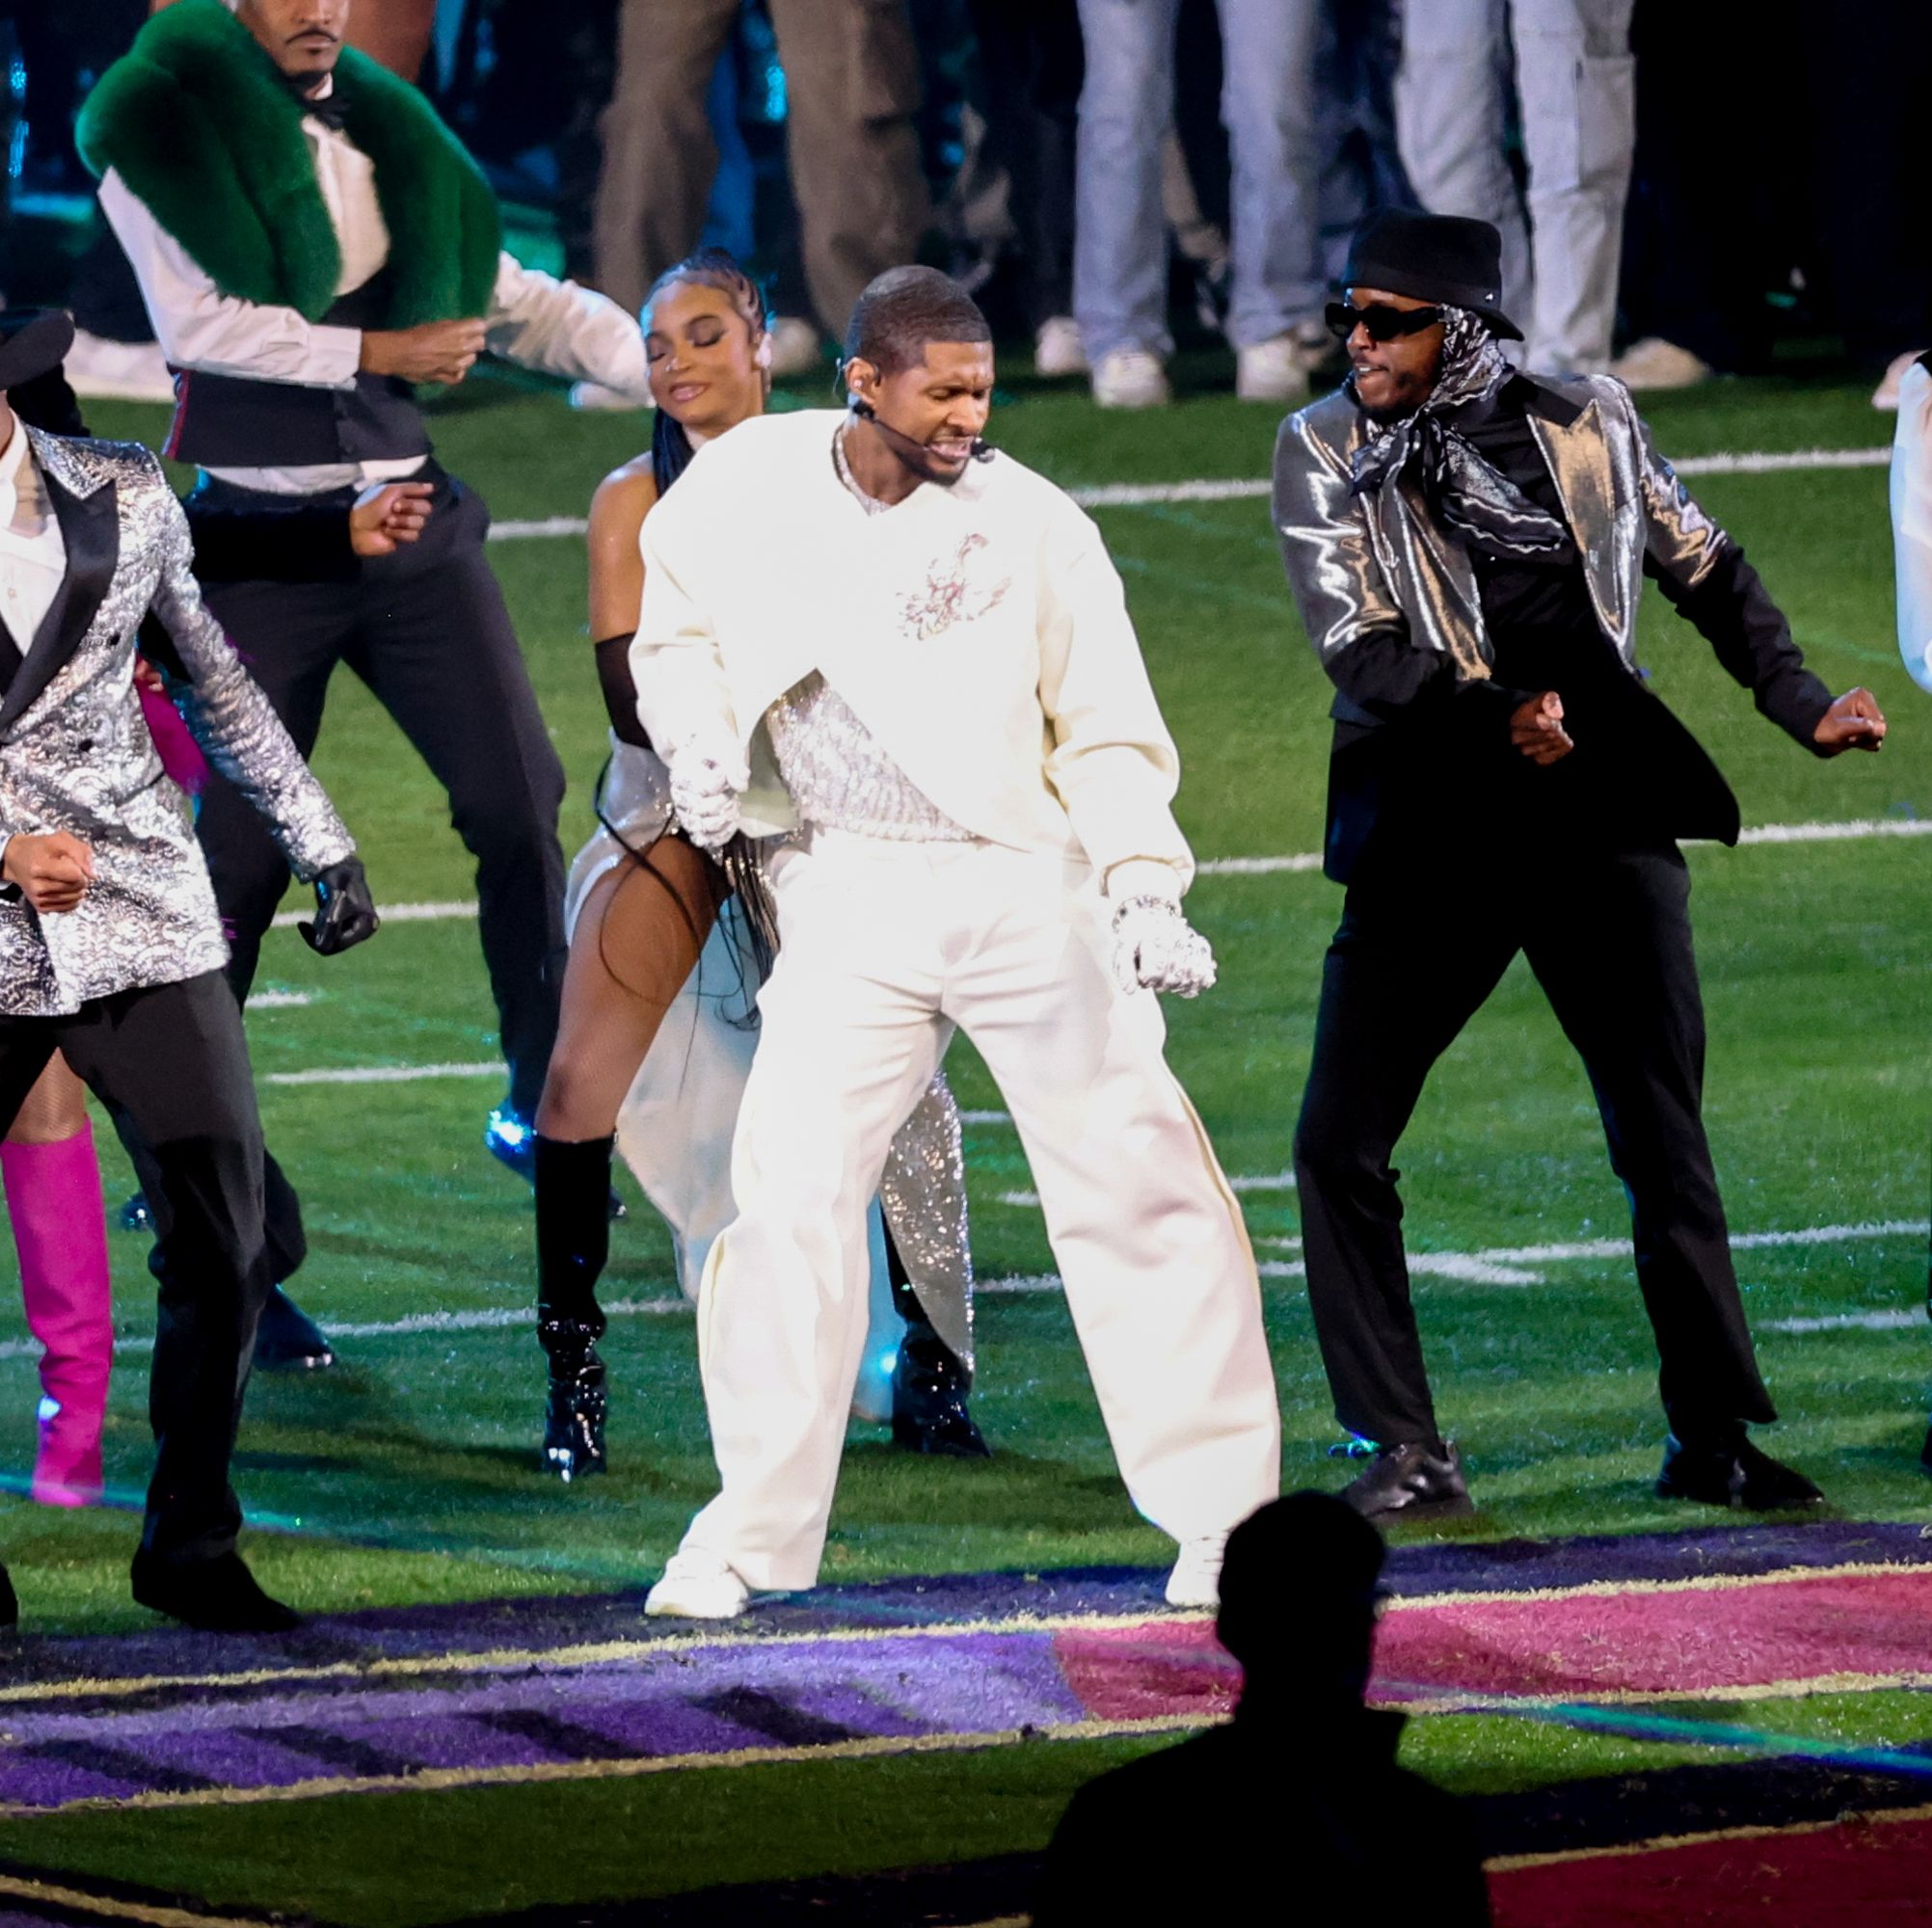 Watch Usher's Full Halftime Performance Right This Way